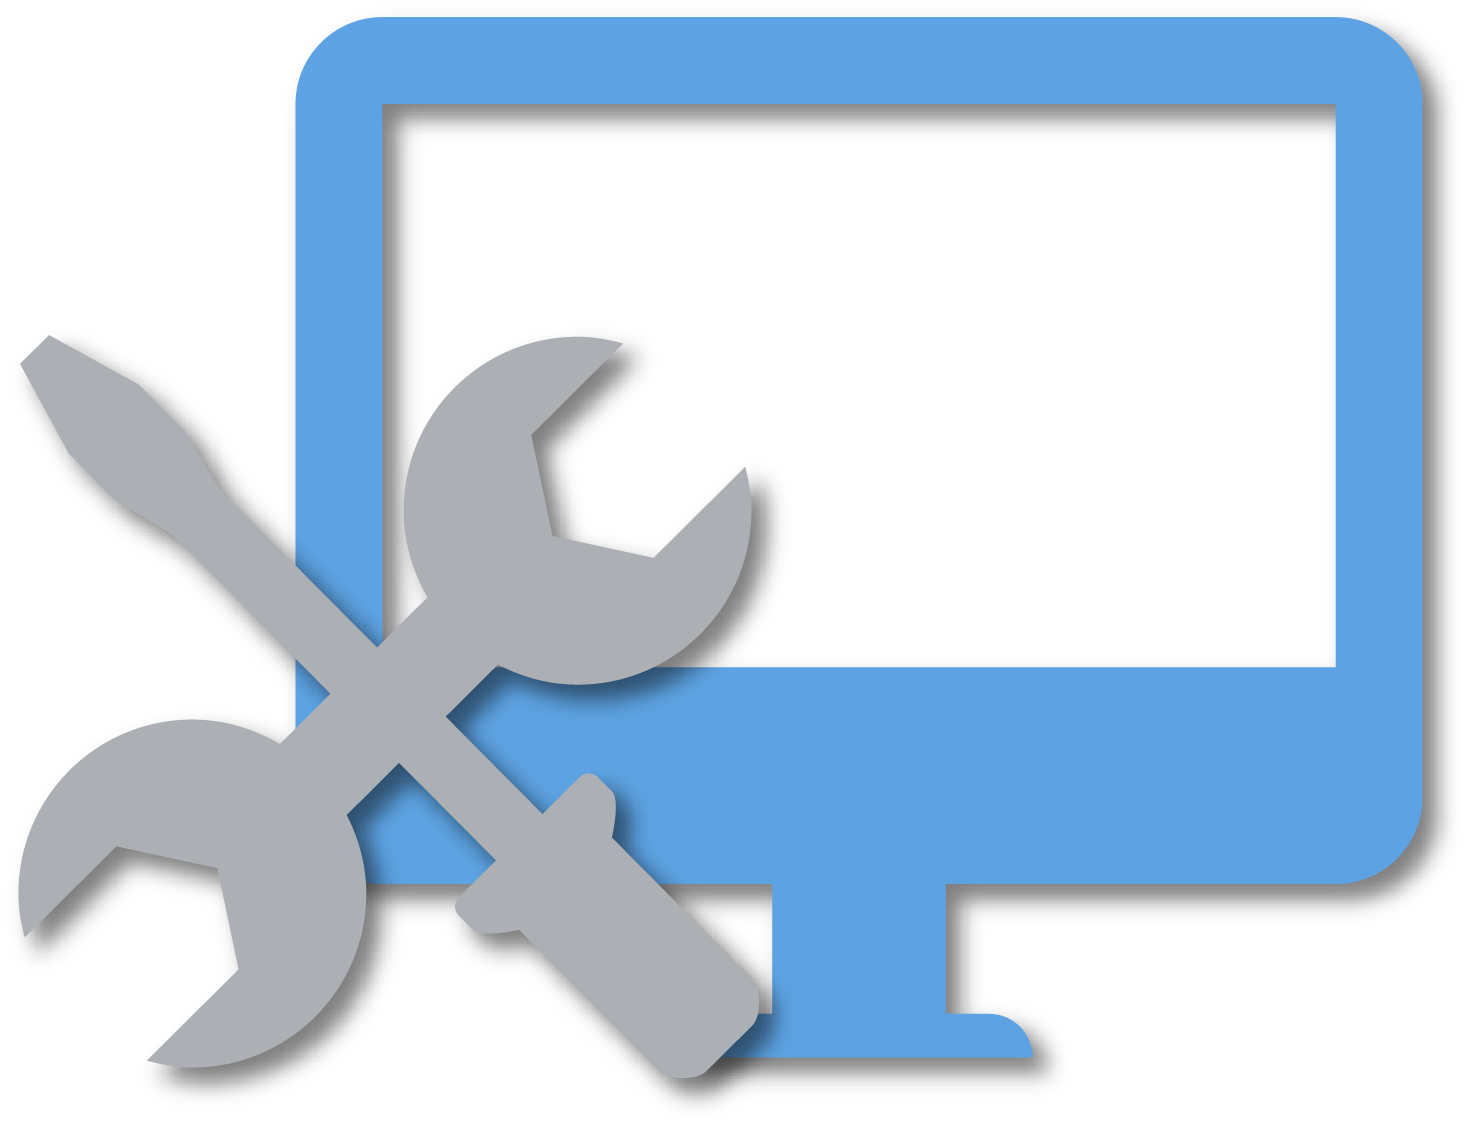 Computer Tech Support Icon